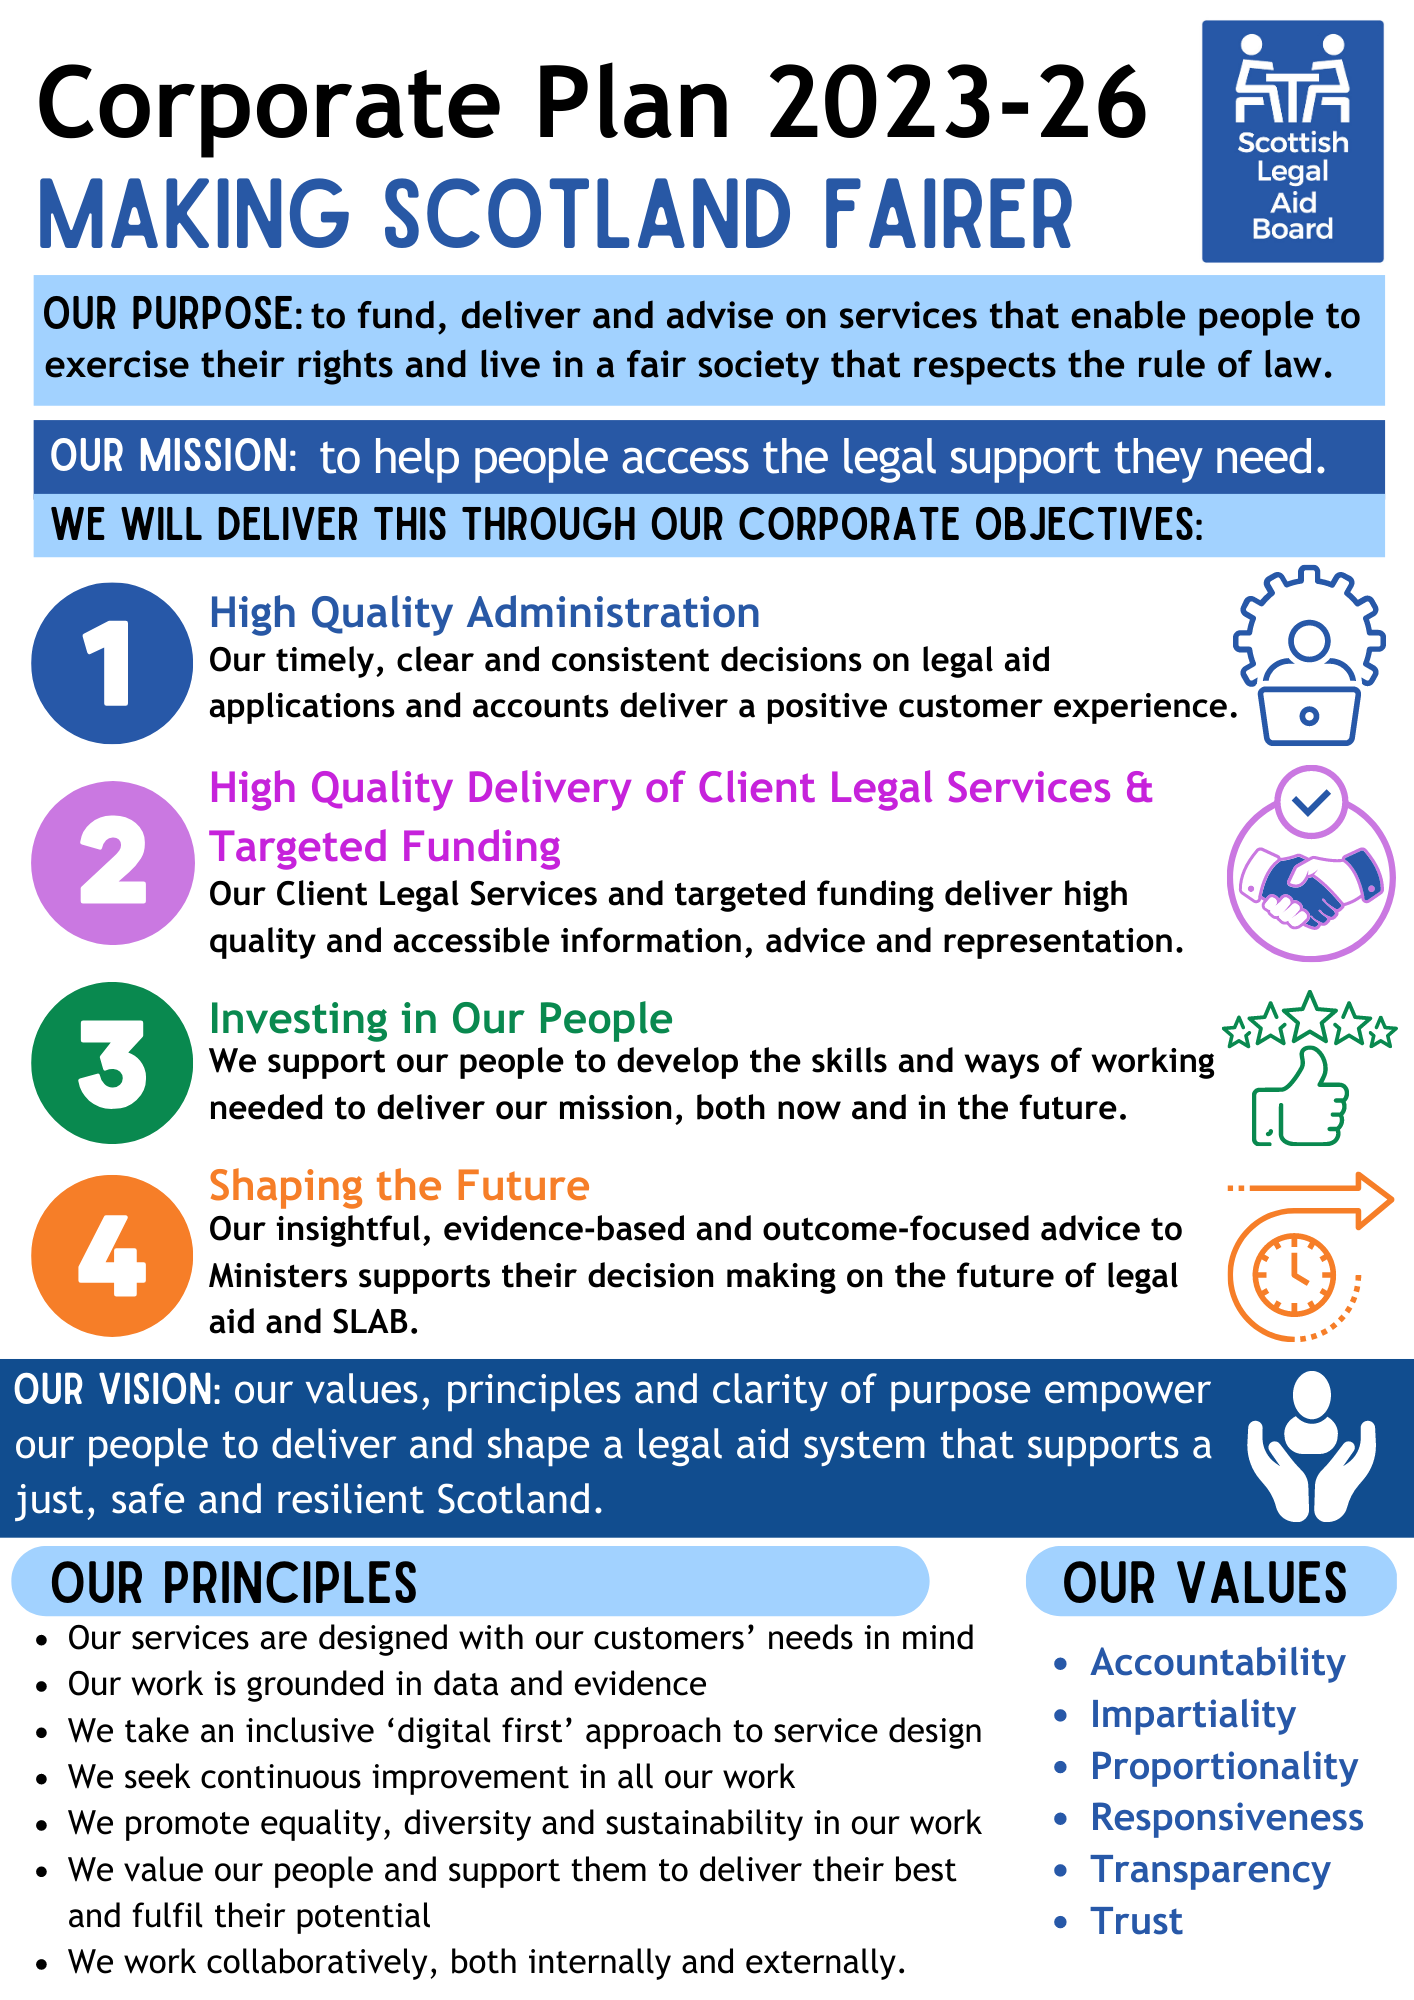 Visual of Corporate Plan 2023-26 on a page summarizing our Purpose and Mission as well as our vision, principles and values.